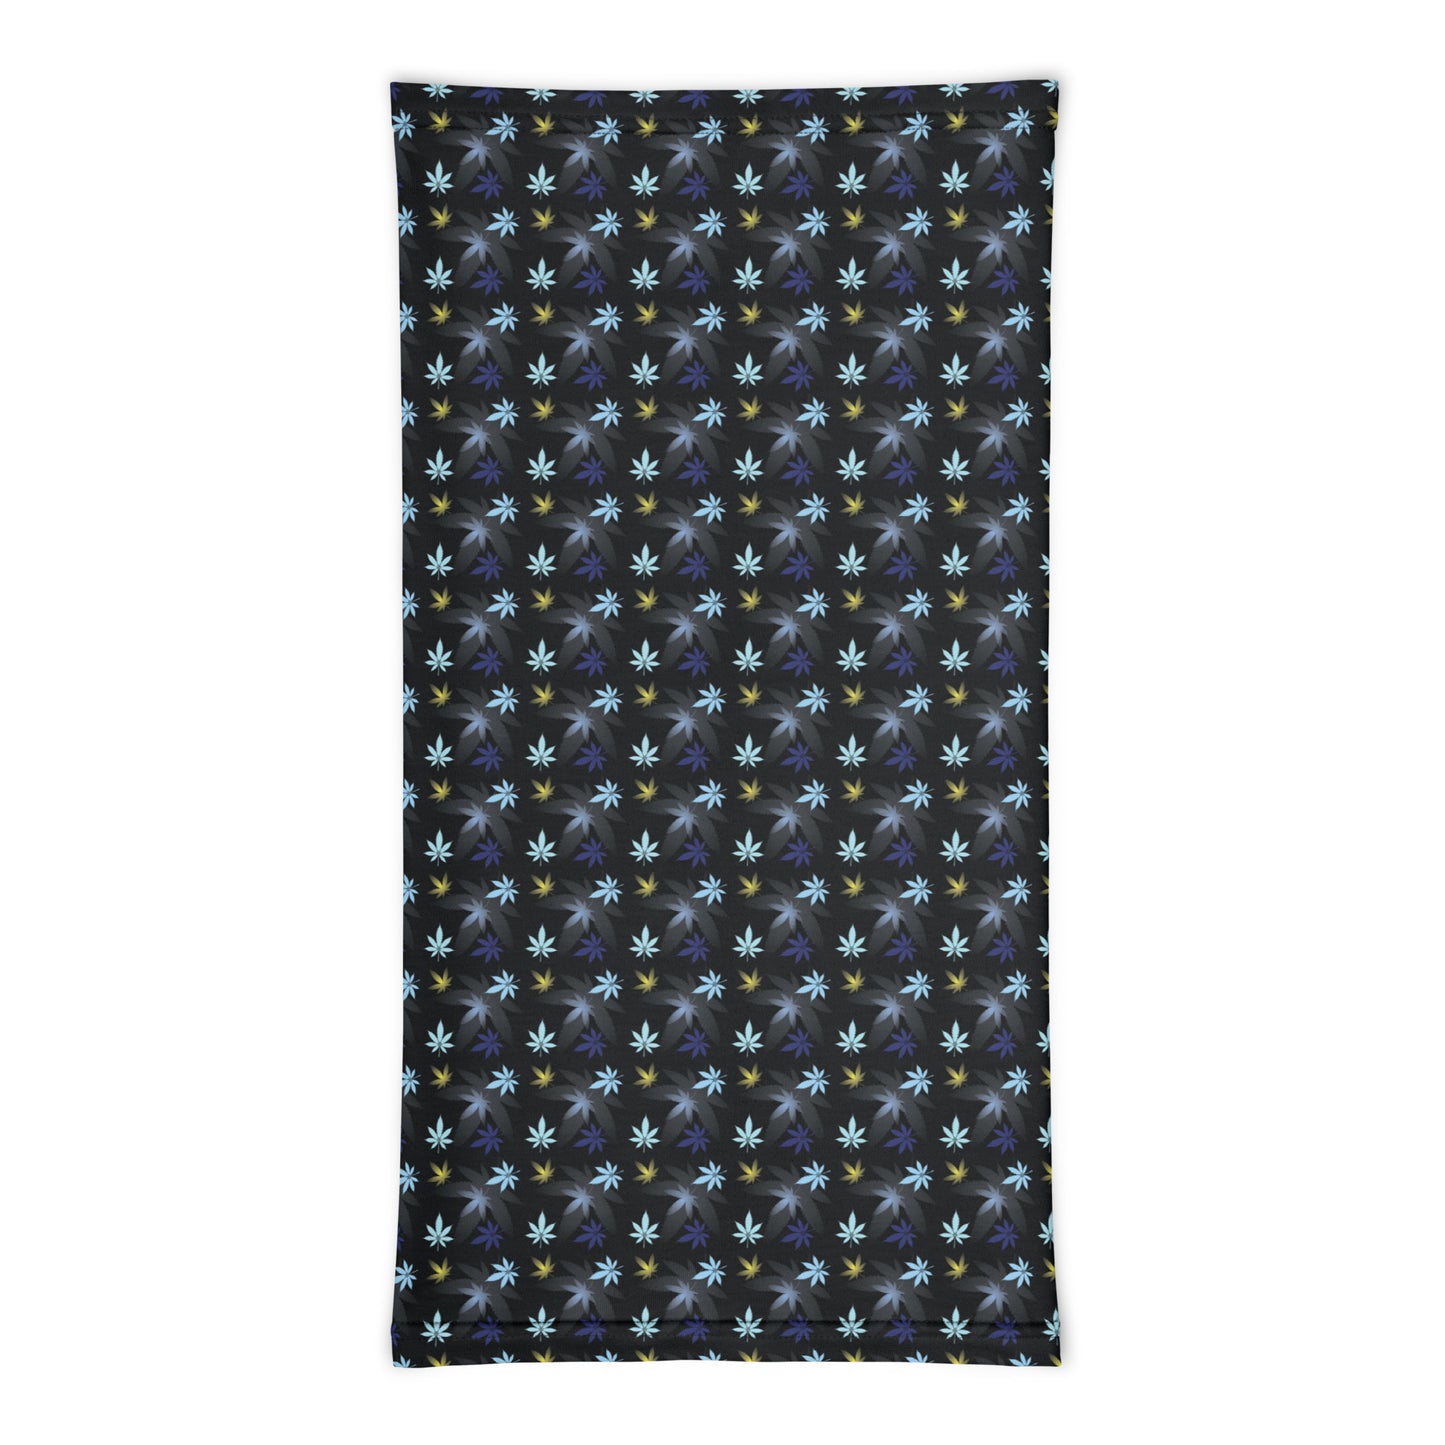 Chasing The Blues Neck Gaiter